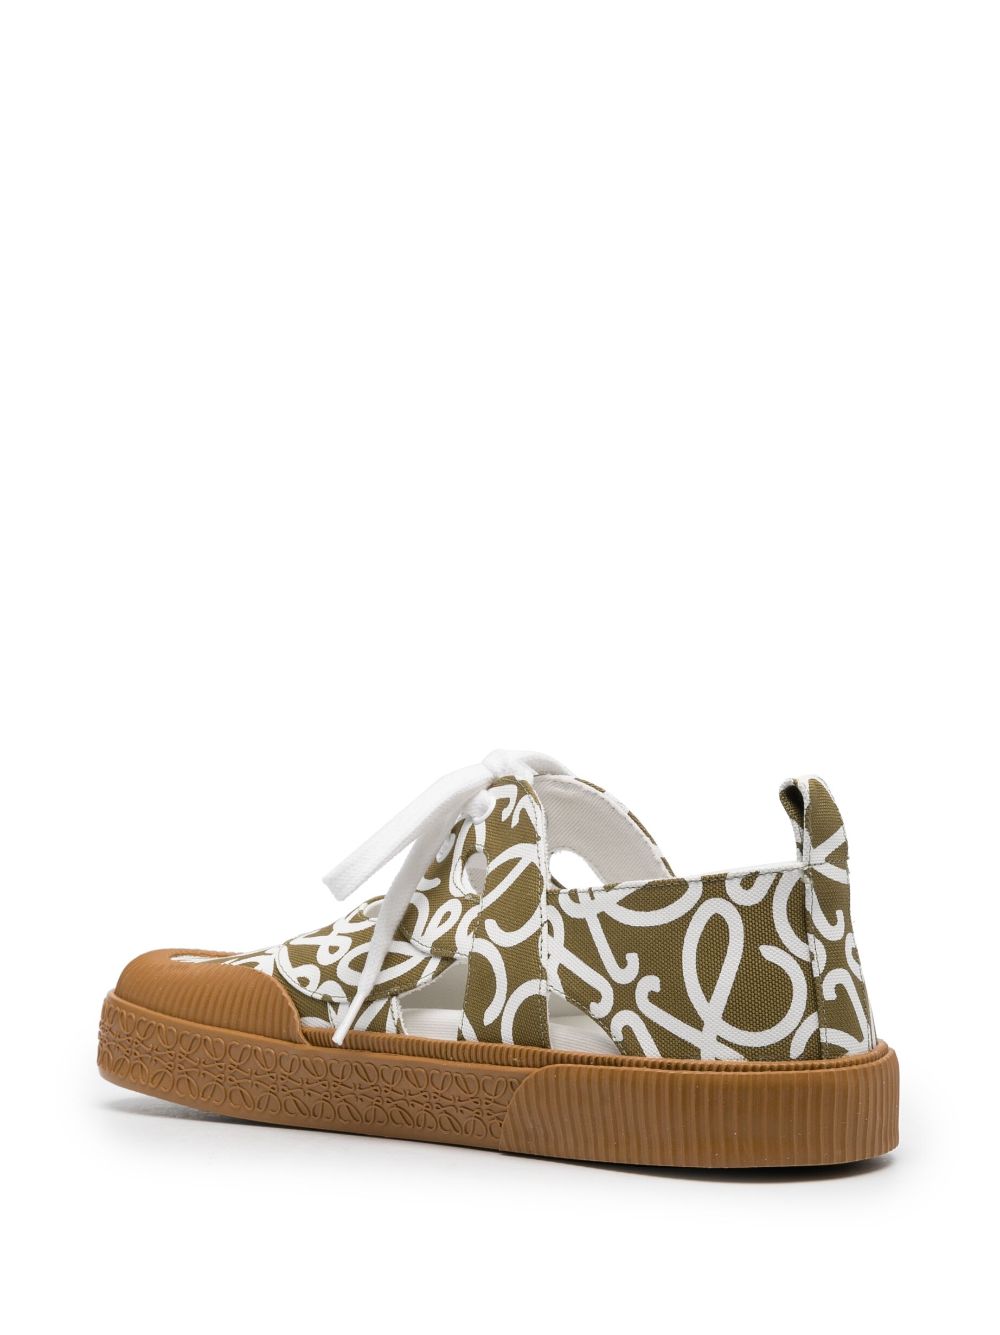 Loewe Paula's Ibiza LOEWE PAULA'S IBIZA- Lace-up Canvas Sneakers